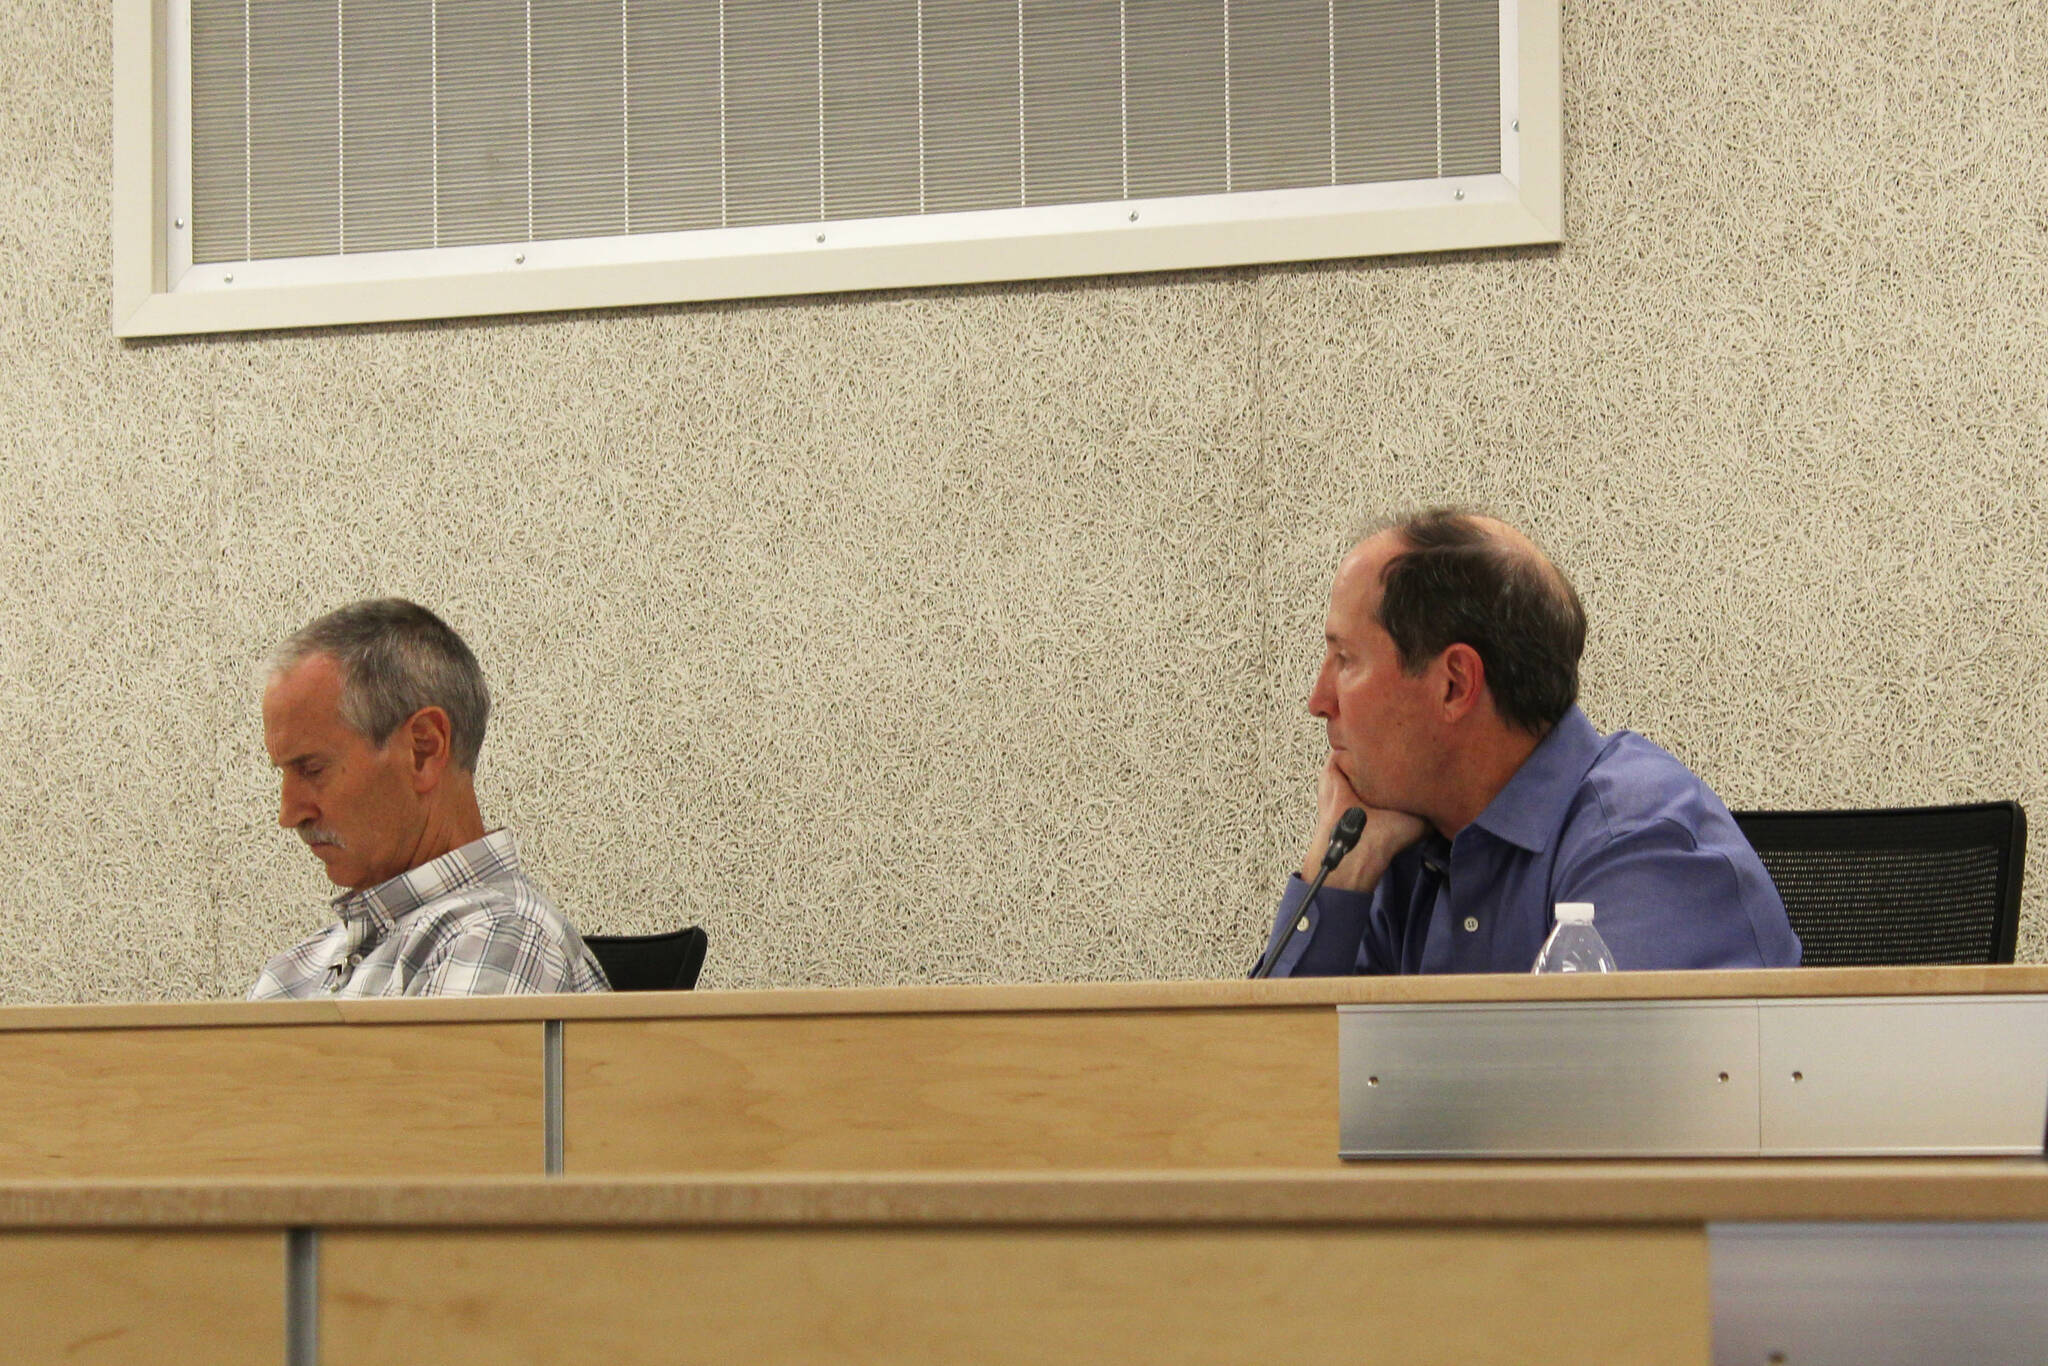 Kenai Peninsula Borough Mayor Mike Navarre, right, and his chief of staff, Max Best, participate in an assembly meeting on Tuesday, Oct. 11, 2022, in Soldotna, Alaska. The meeting was Navarre’s first as mayor since being appointed last month. (Ashlyn O’Hara/Peninsula Clarion)